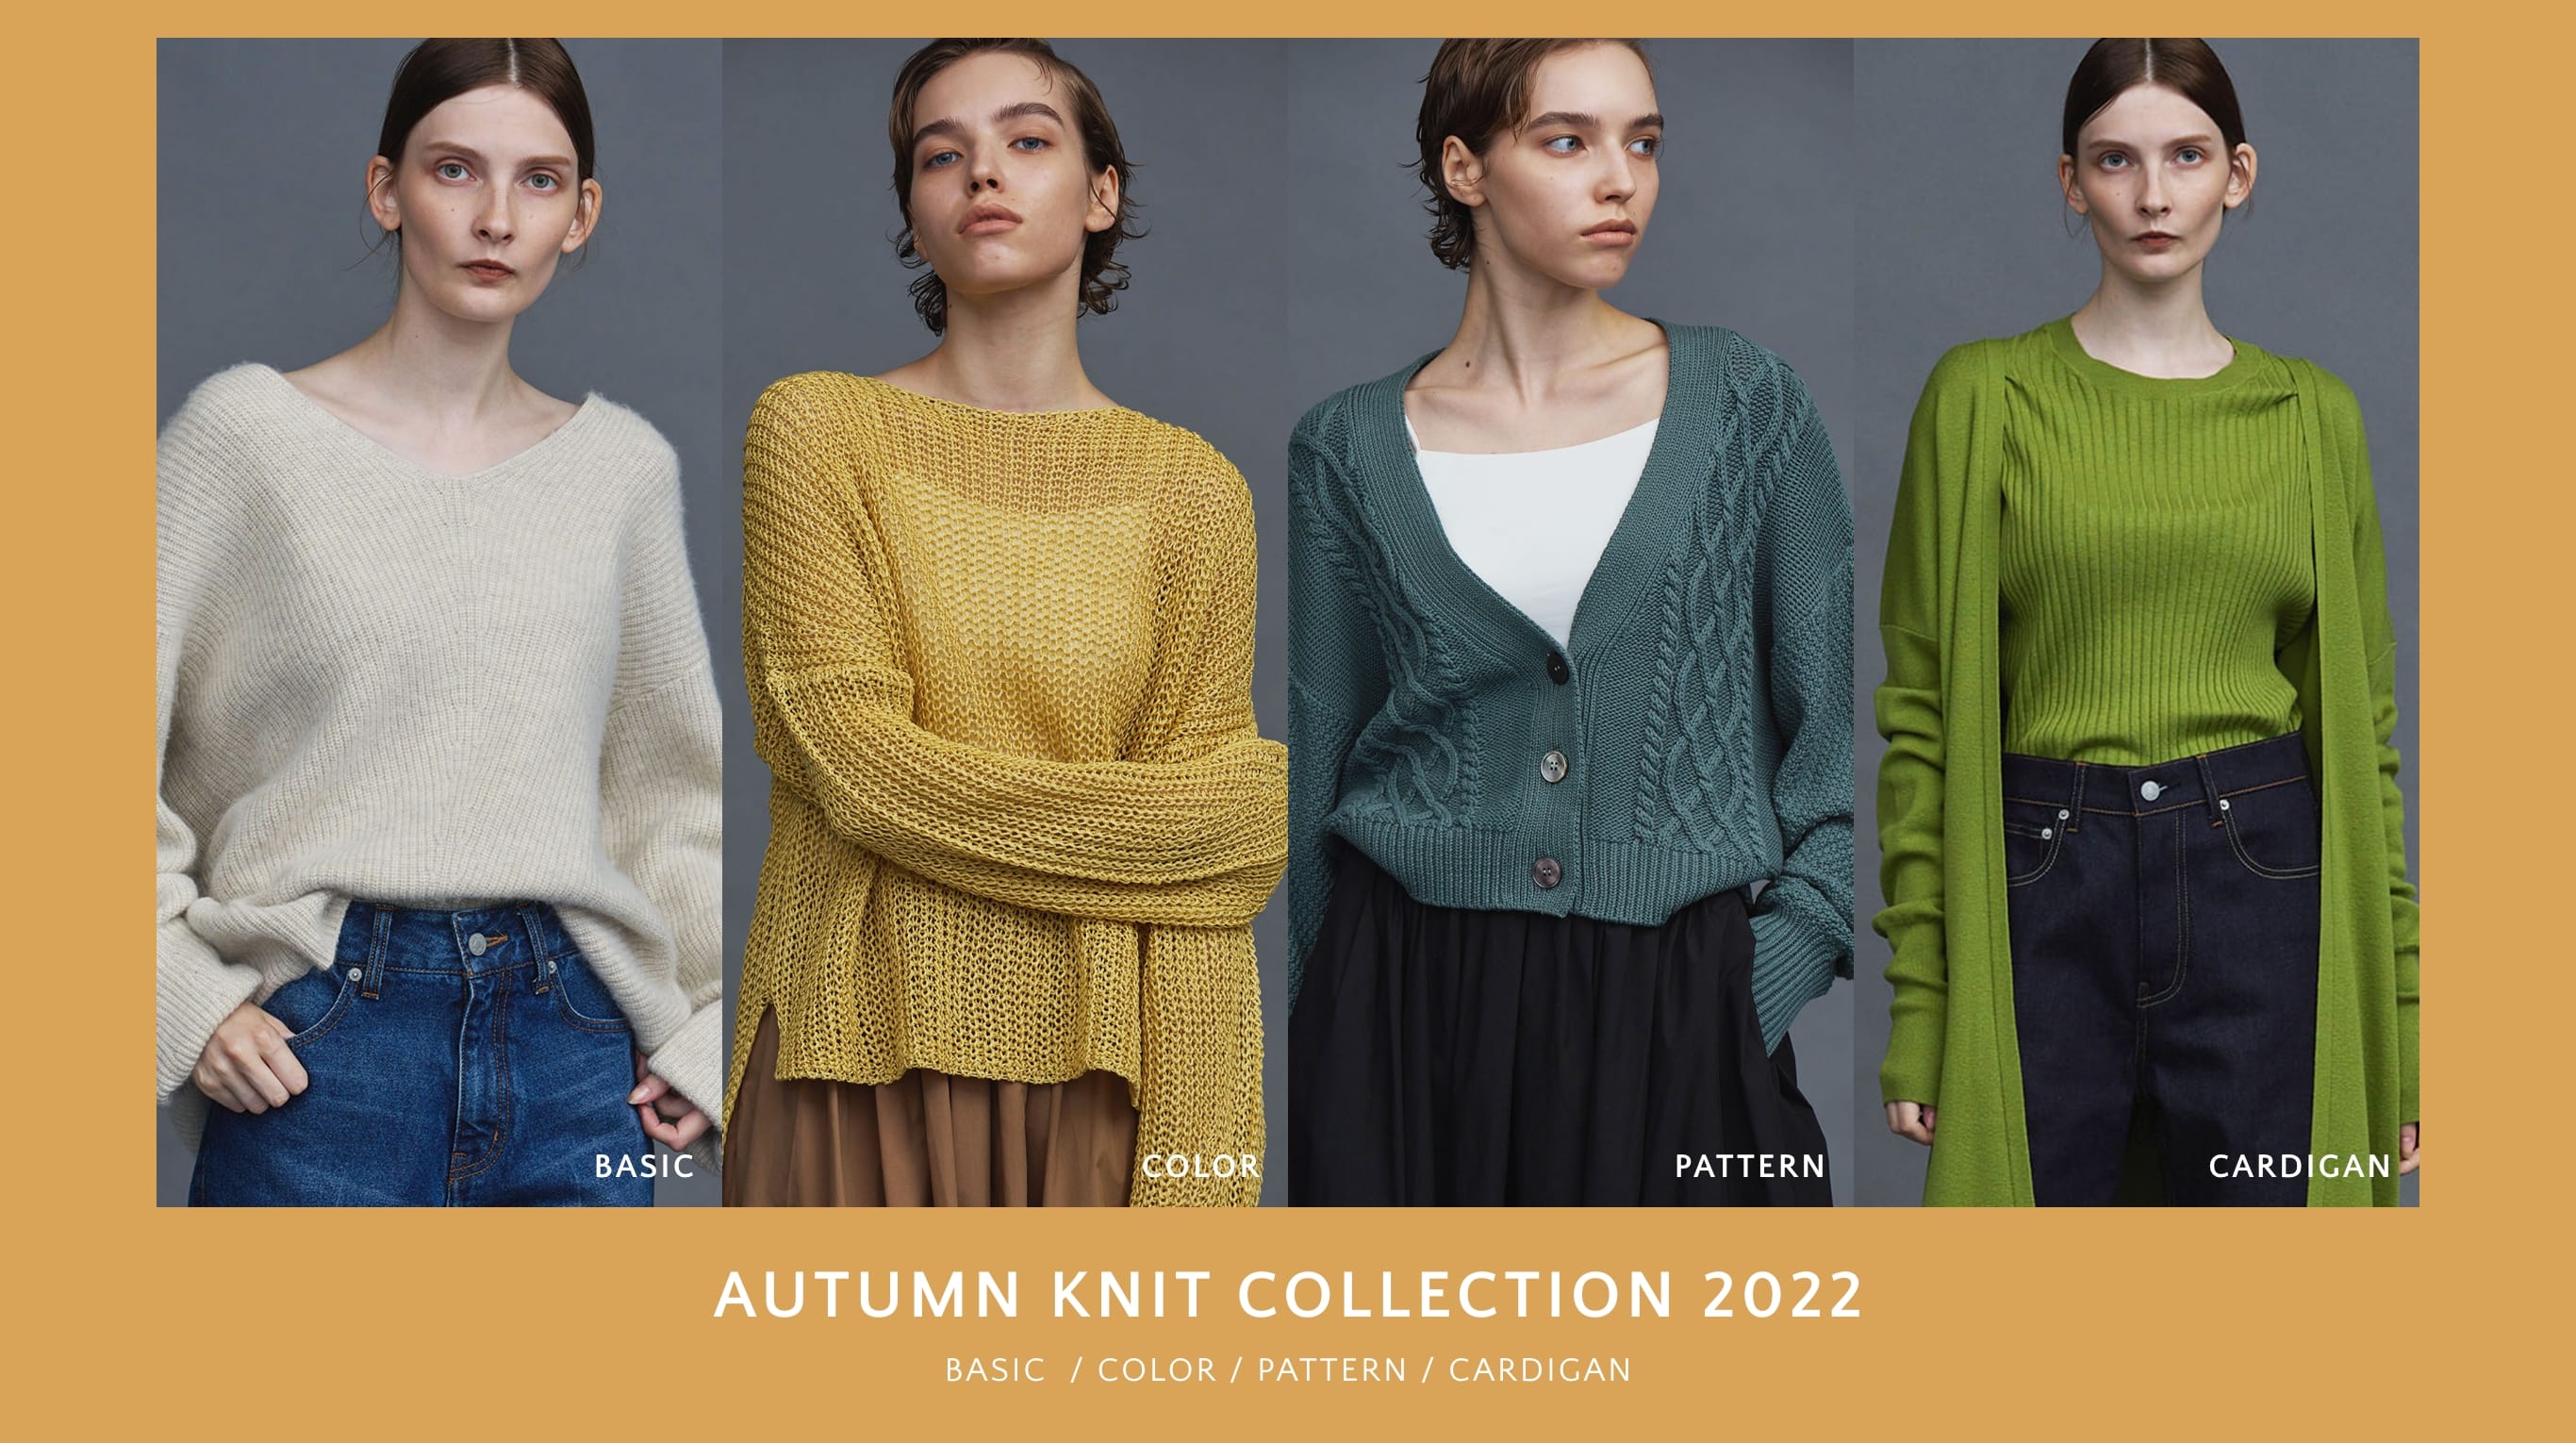 AUTUMN KNIT COLLECTION 2022 BASIC / COLOR / PATTERN / CARDIGAN